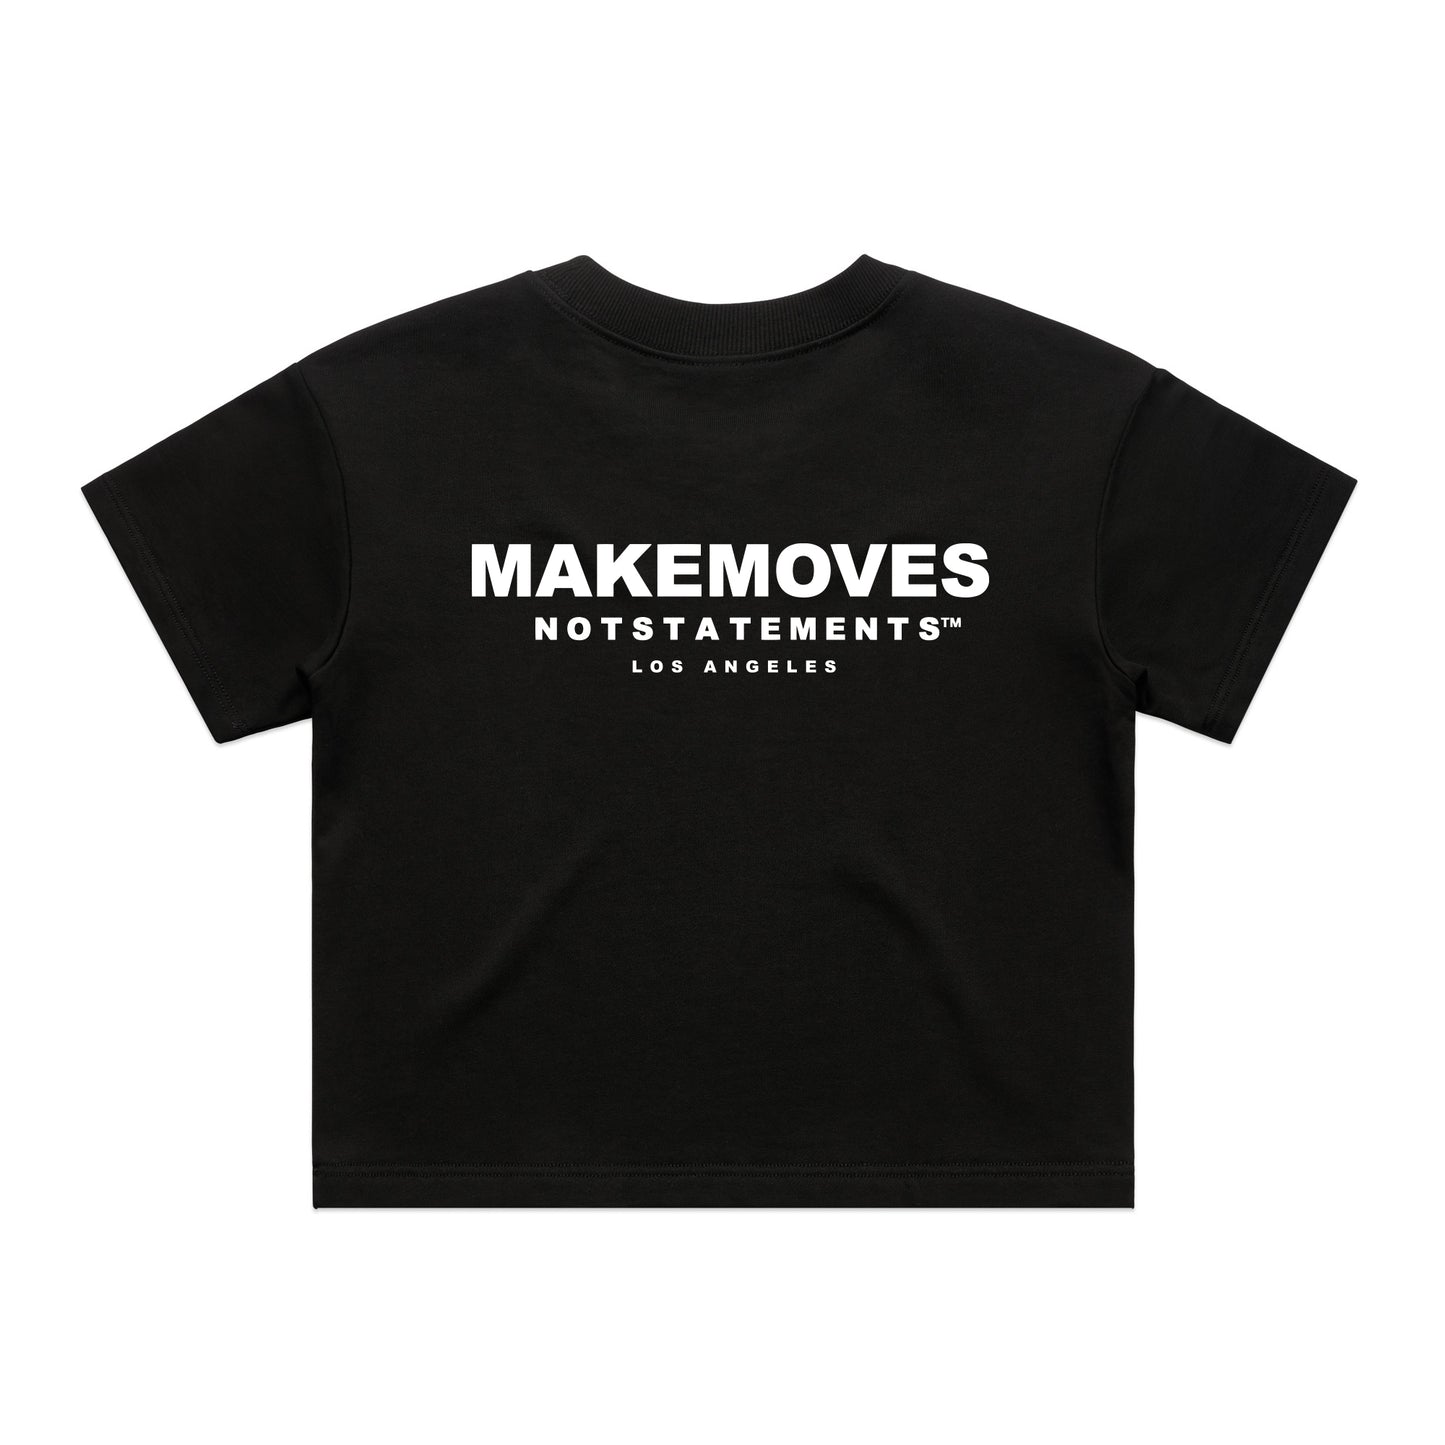 MMNS Woman's Tee in black is made of 100% cotton, french terry. The tee features a small Make Moves Not Statements logo on the front corner and a large logo on the back in white font.